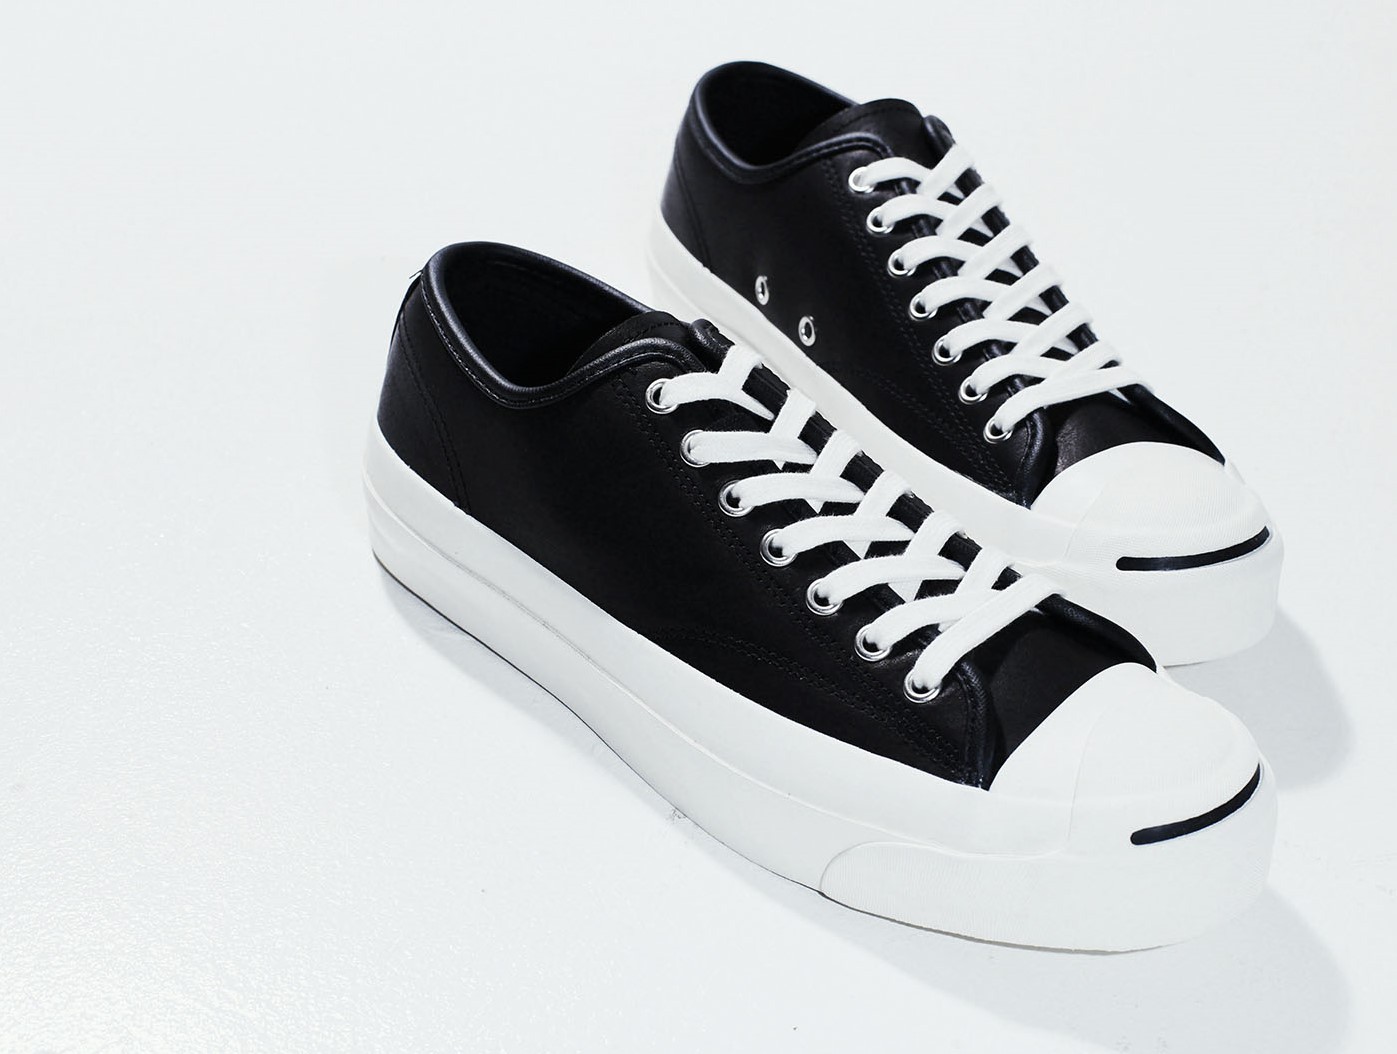 CONVERSE ADDICT “JACK PURCELL LEATHER” | SHOES MASTER